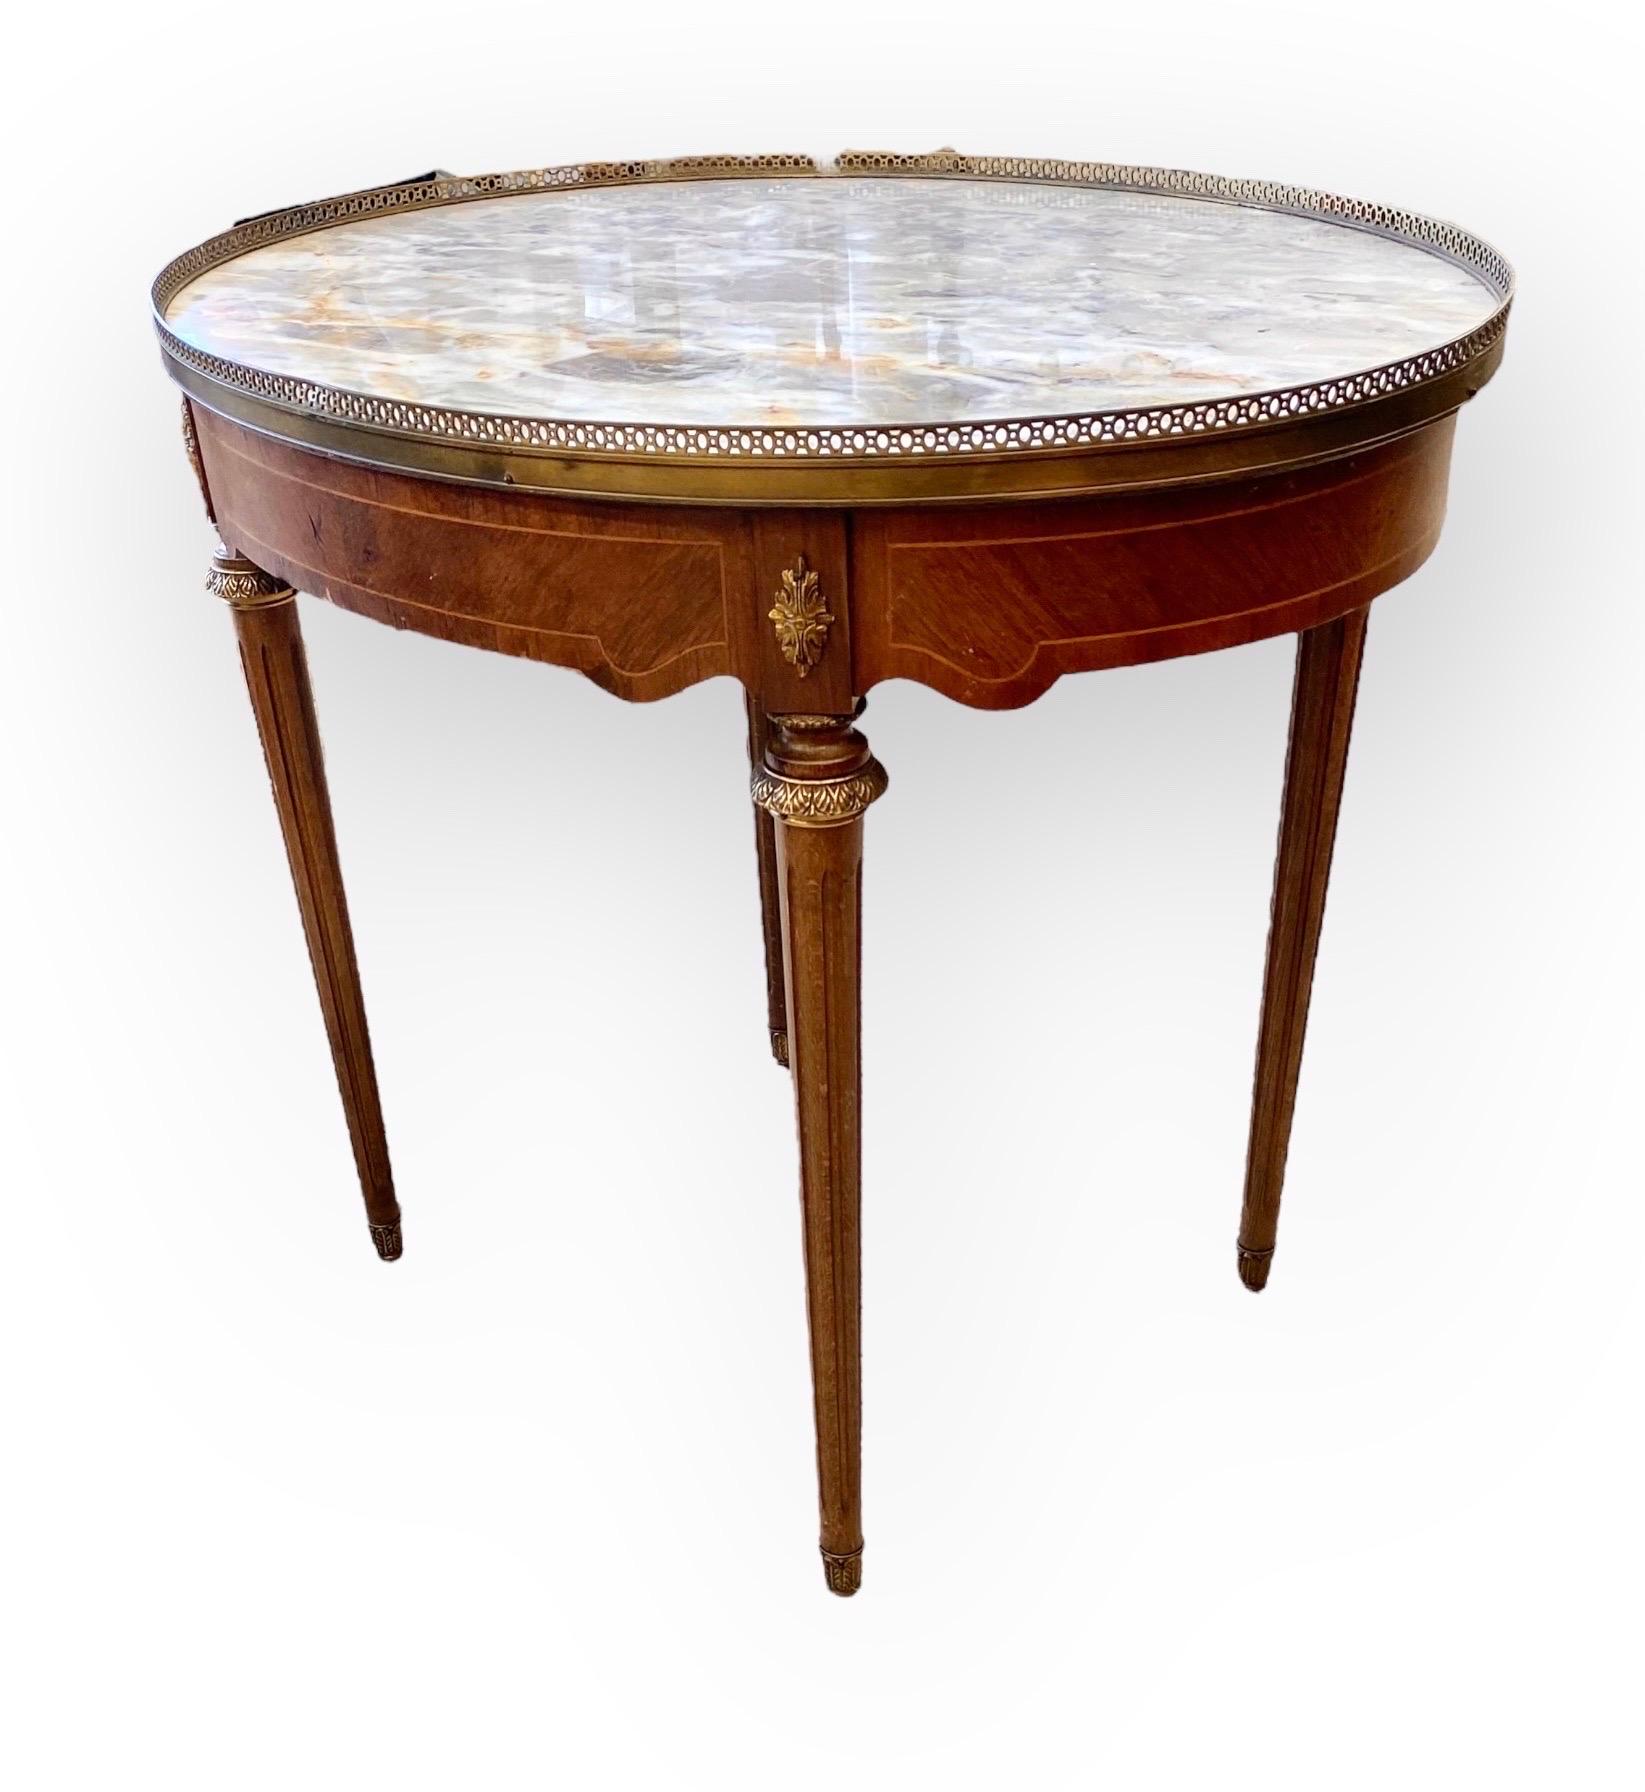 French Louis XVI Style Inlaid Carved Walnut Marble Top Bouillote Table, 20th C.  For Sale 3